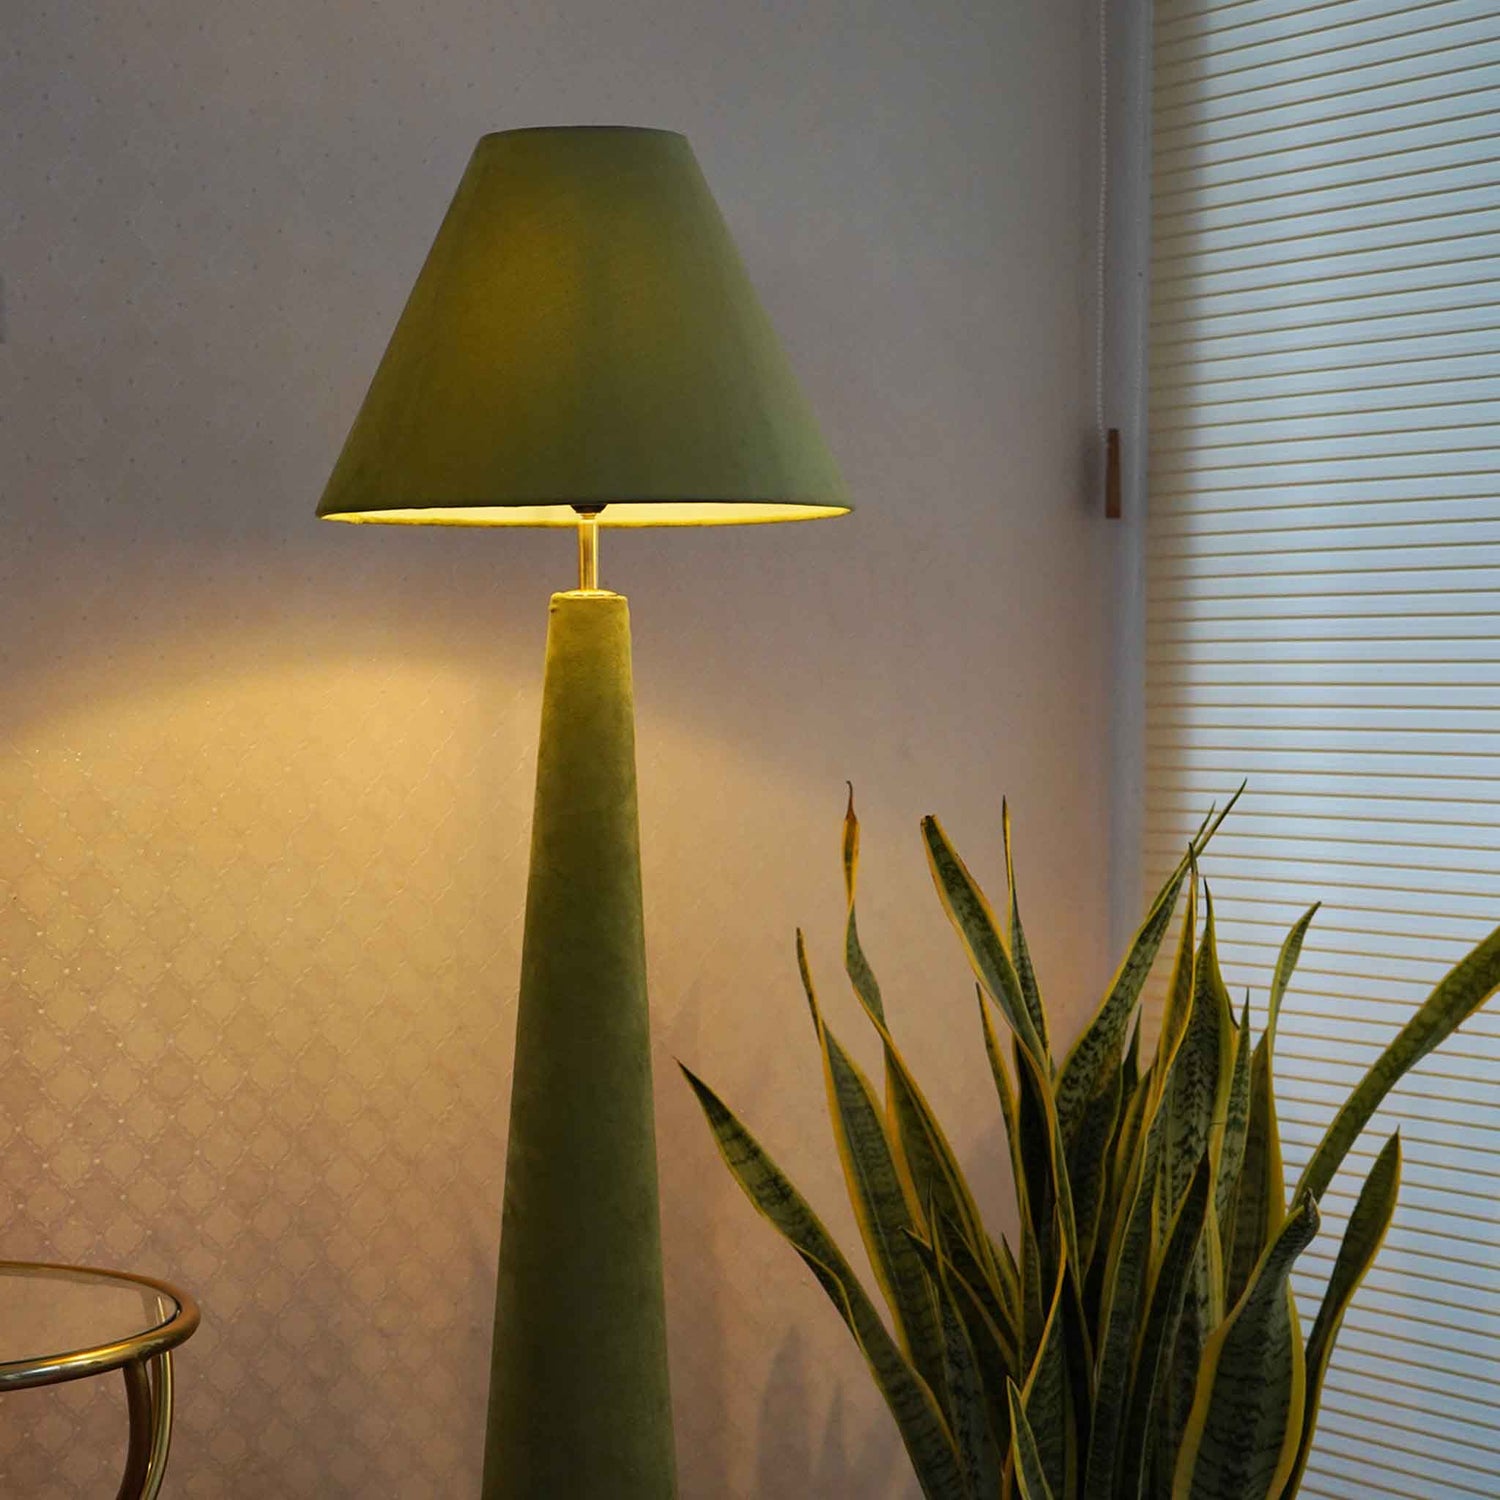 Green colored velvet floor lamp is lit-up and placed in a set-up with a large plant next to window blinds.